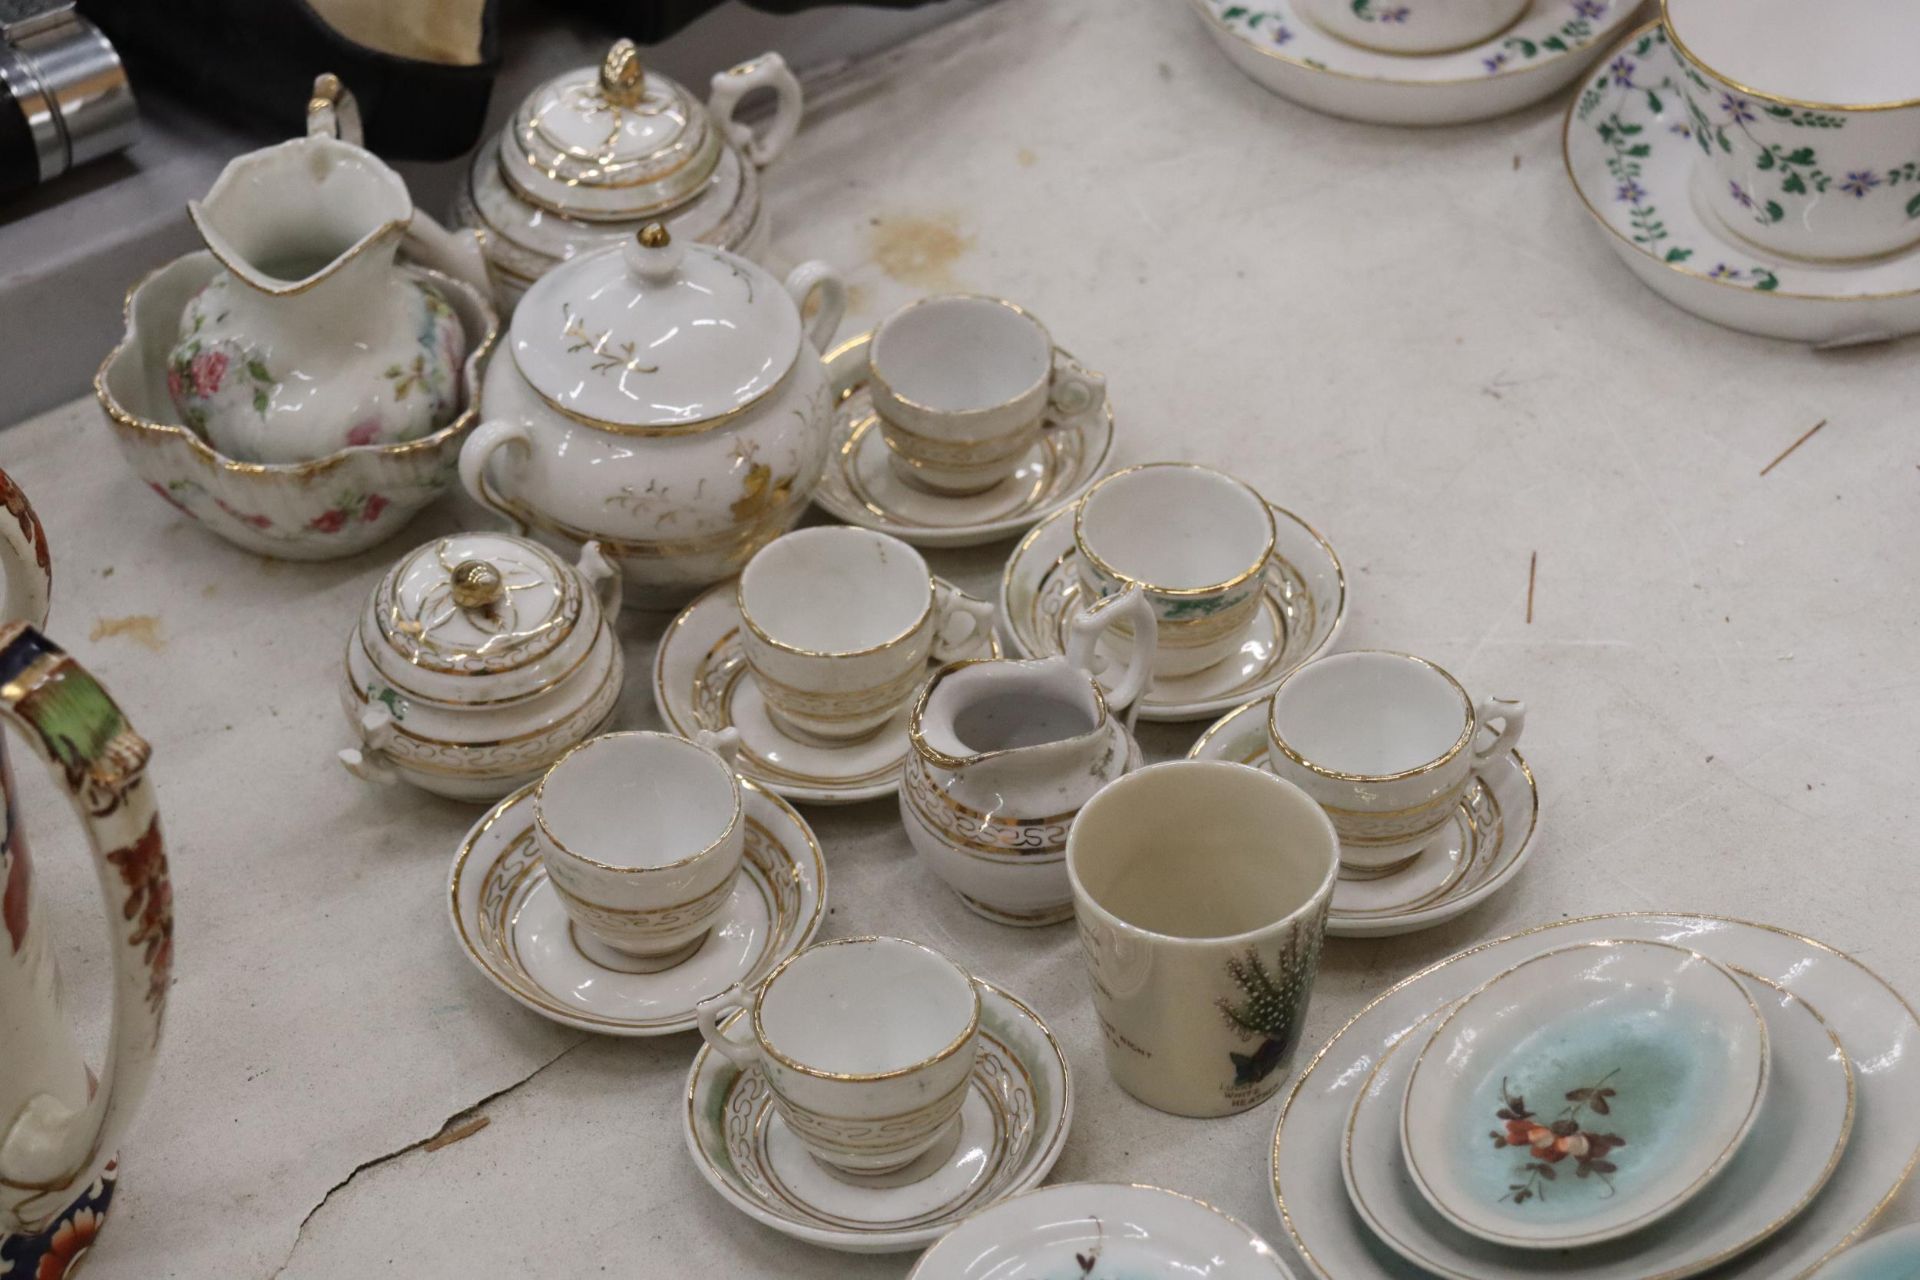 A VINTAGE DOLL'S TEASET AND DINNER SERVICE TO INCLUDE PLATES, CUPS, SAUCERS, TEAPOT, ETC - Image 3 of 10